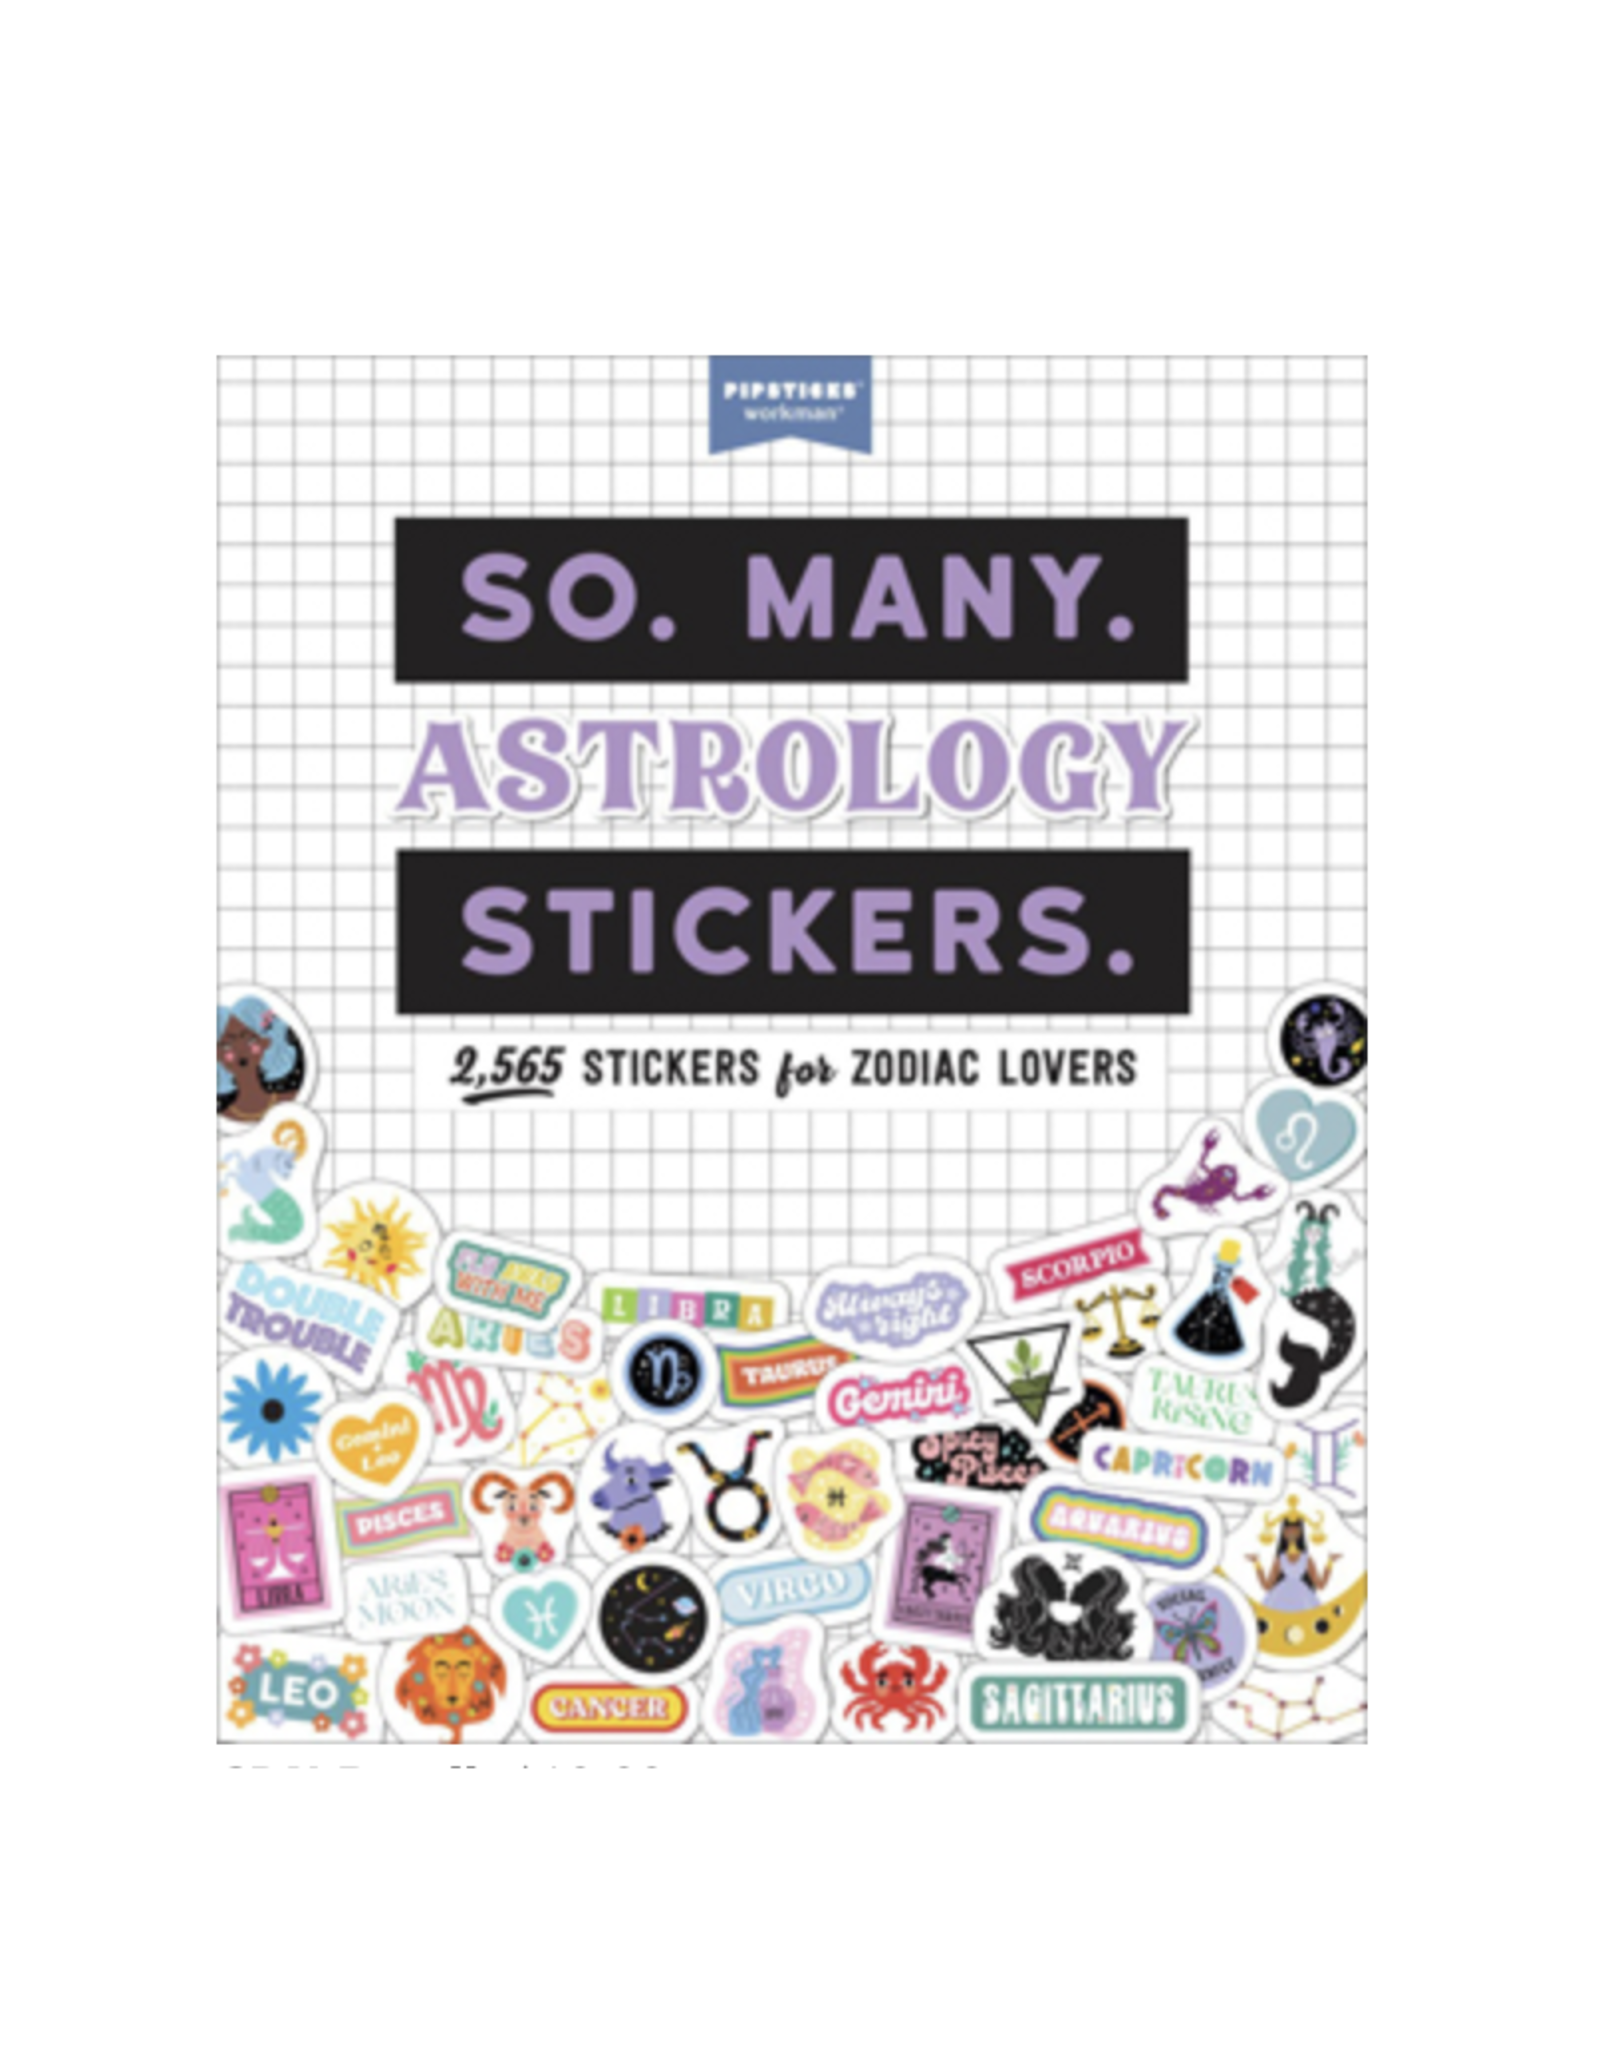 So. Many. Astrology Stickers. - 2,565 Stickers for Zodiac Lovers